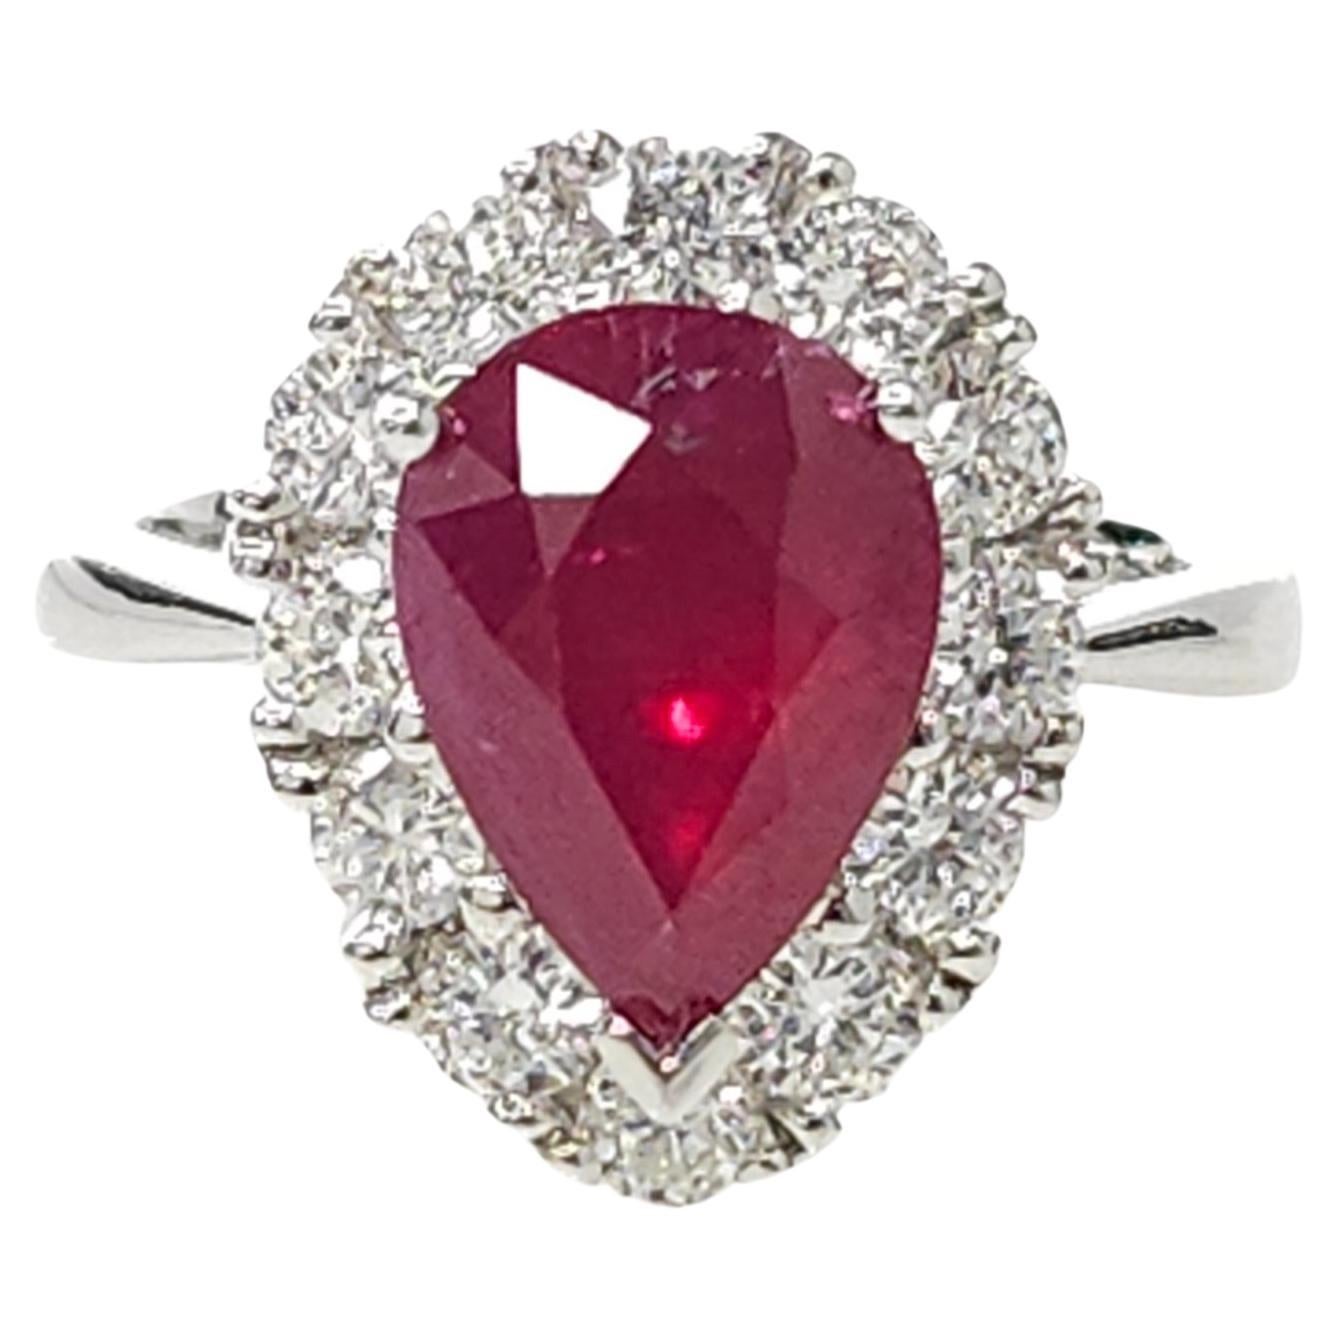 Elevate your jewelry collection with the mesmerizing beauty of this IGI Certified 3.05 Carat Pear-Shaped Ruby Ring. This exquisite piece showcases a deep purplish red ruby, certified by IGI, in a captivating pear shape that exudes opulence and